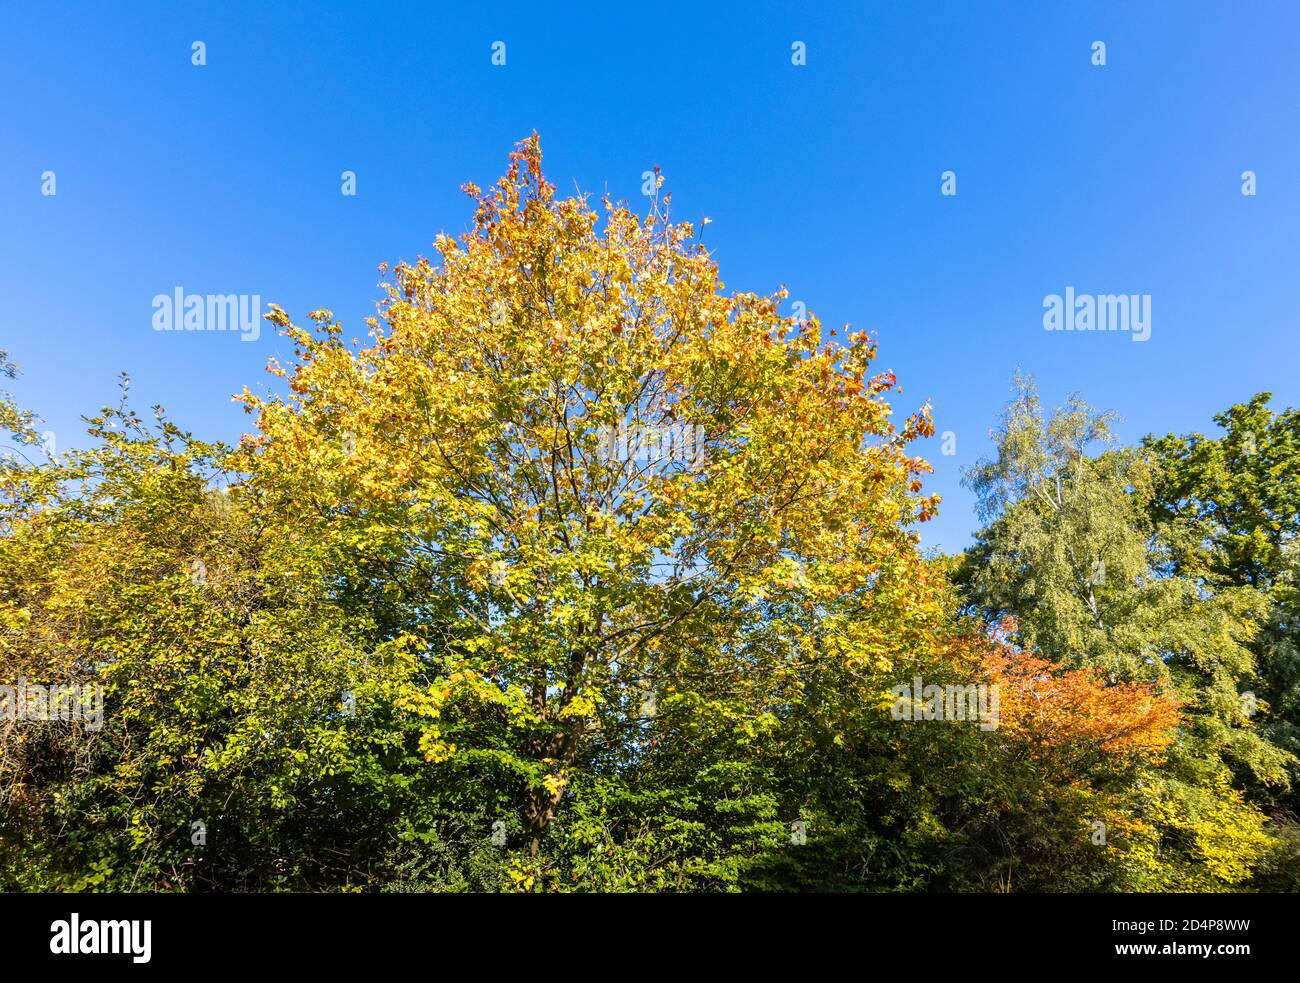 Golden yellow leaves in autumn colours in the crown of a sycamore tree (Acer pseudoplatanus) on a sunny day with a clear blue sky, Surrey, SE England Stock Photo